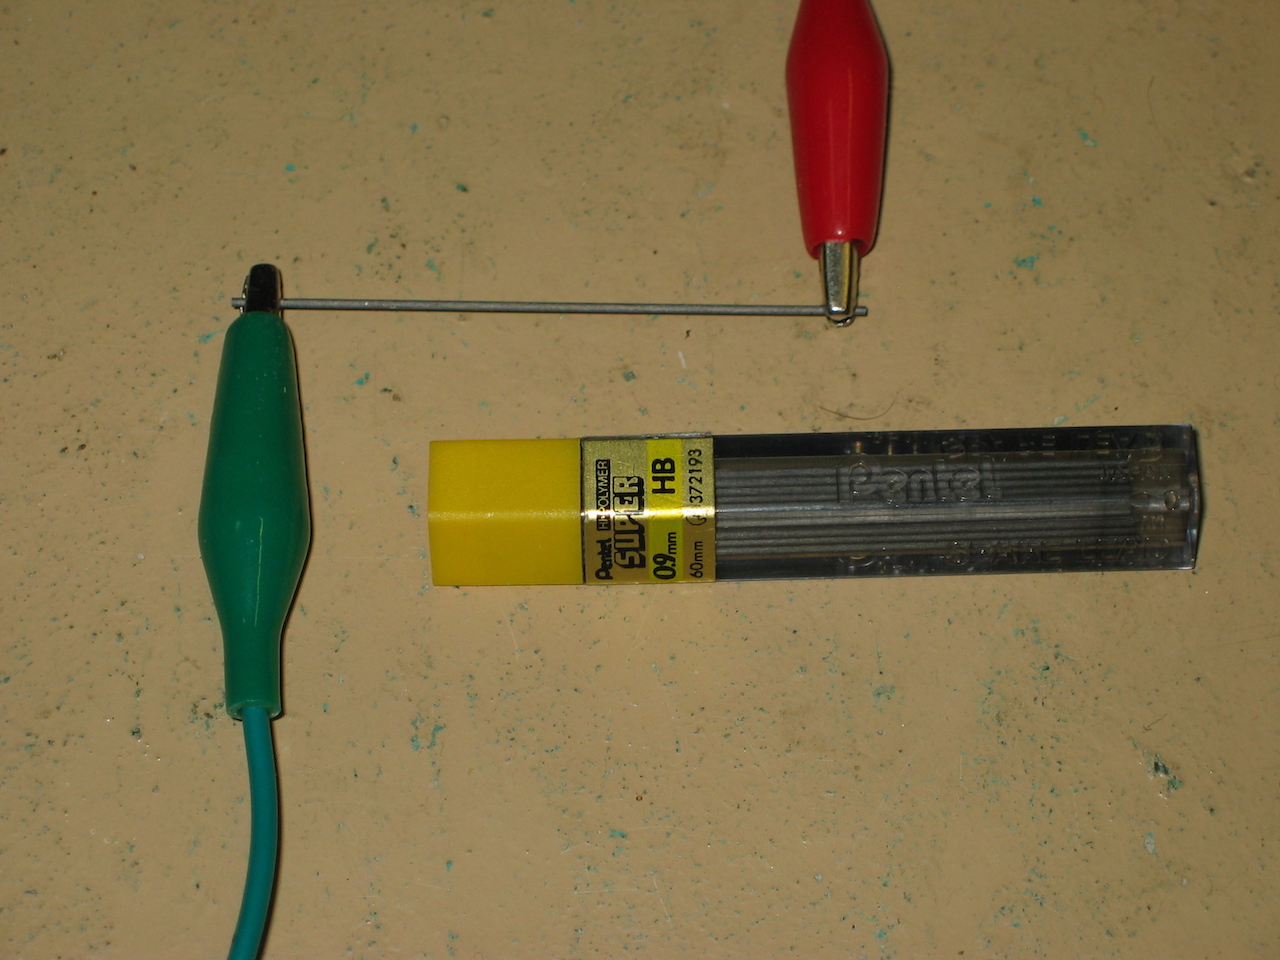 Close-up shot of a mechanical pencil lead with an alligator clip attached to each end, sitting adjacent to a tube of pencil leads.